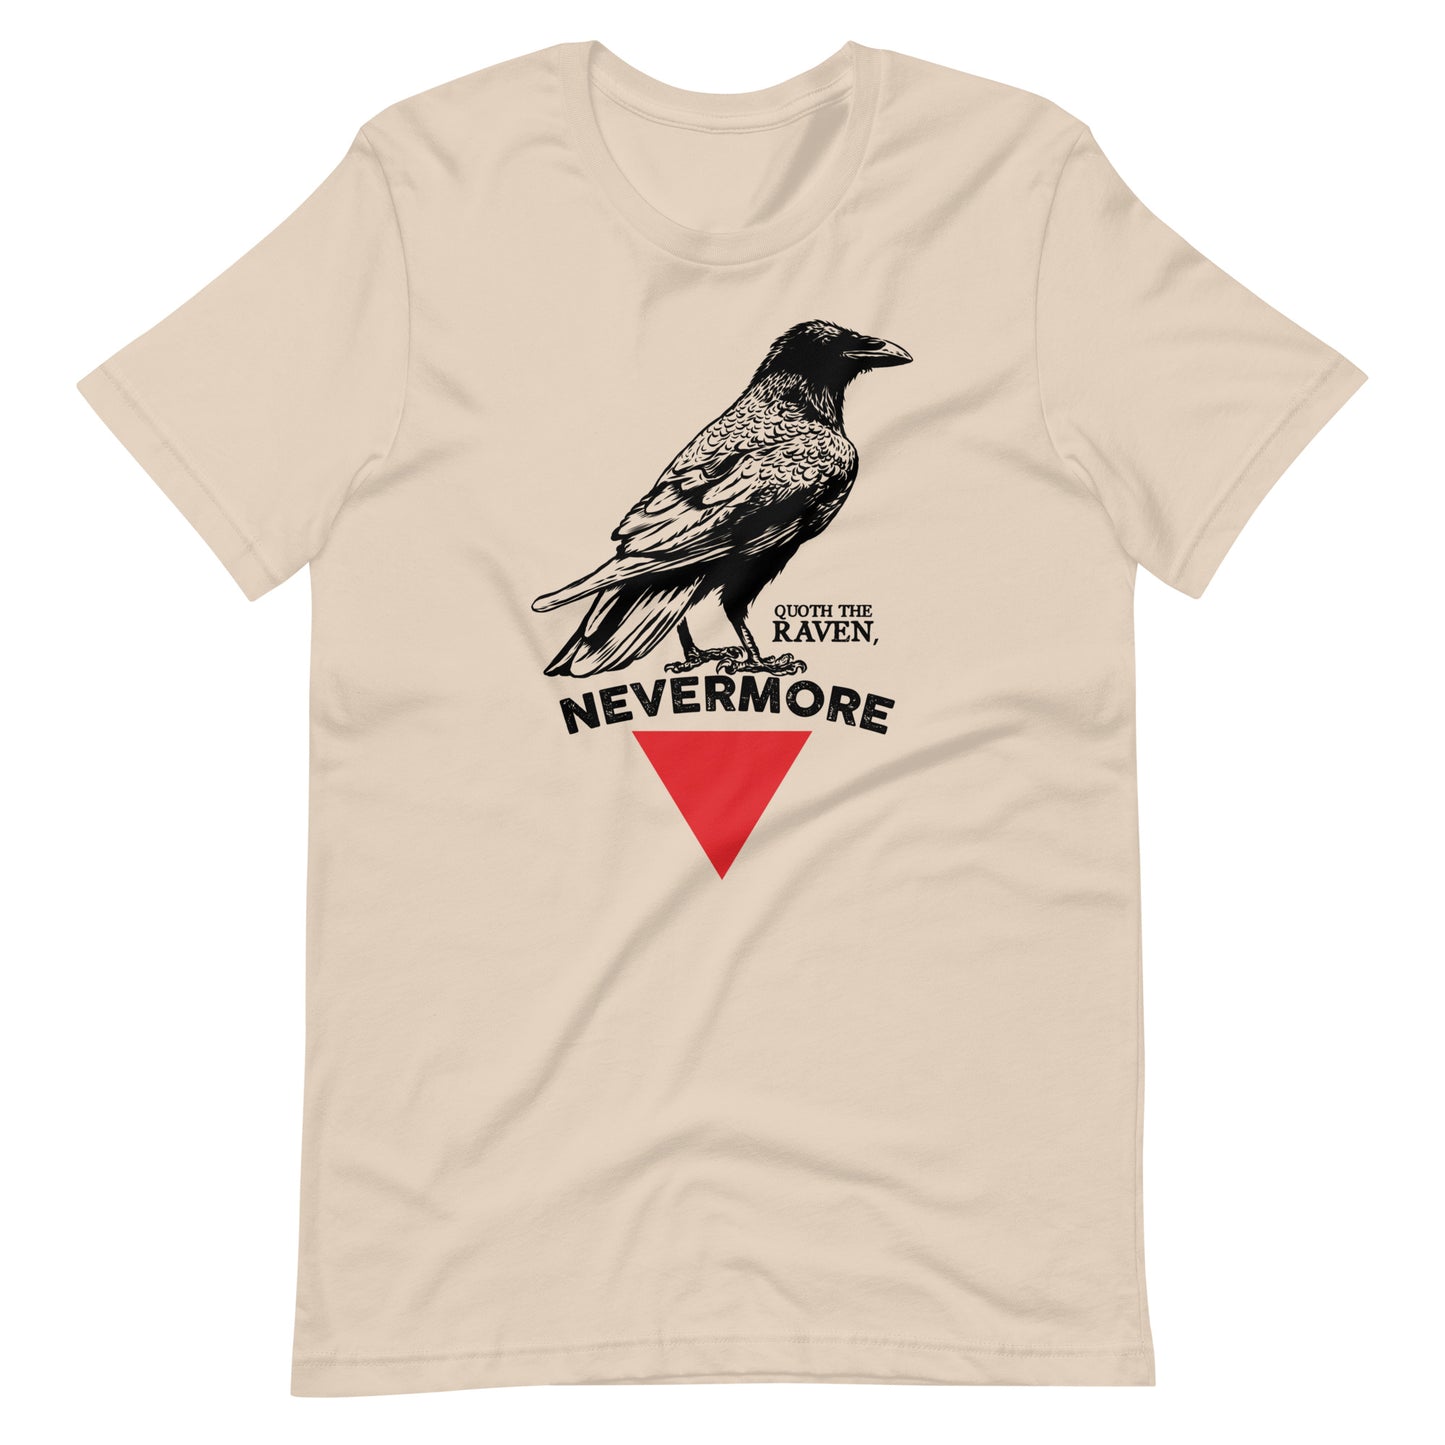 The Raven Nevermore Triangle - Men's t-shirt - Soft Cream Front